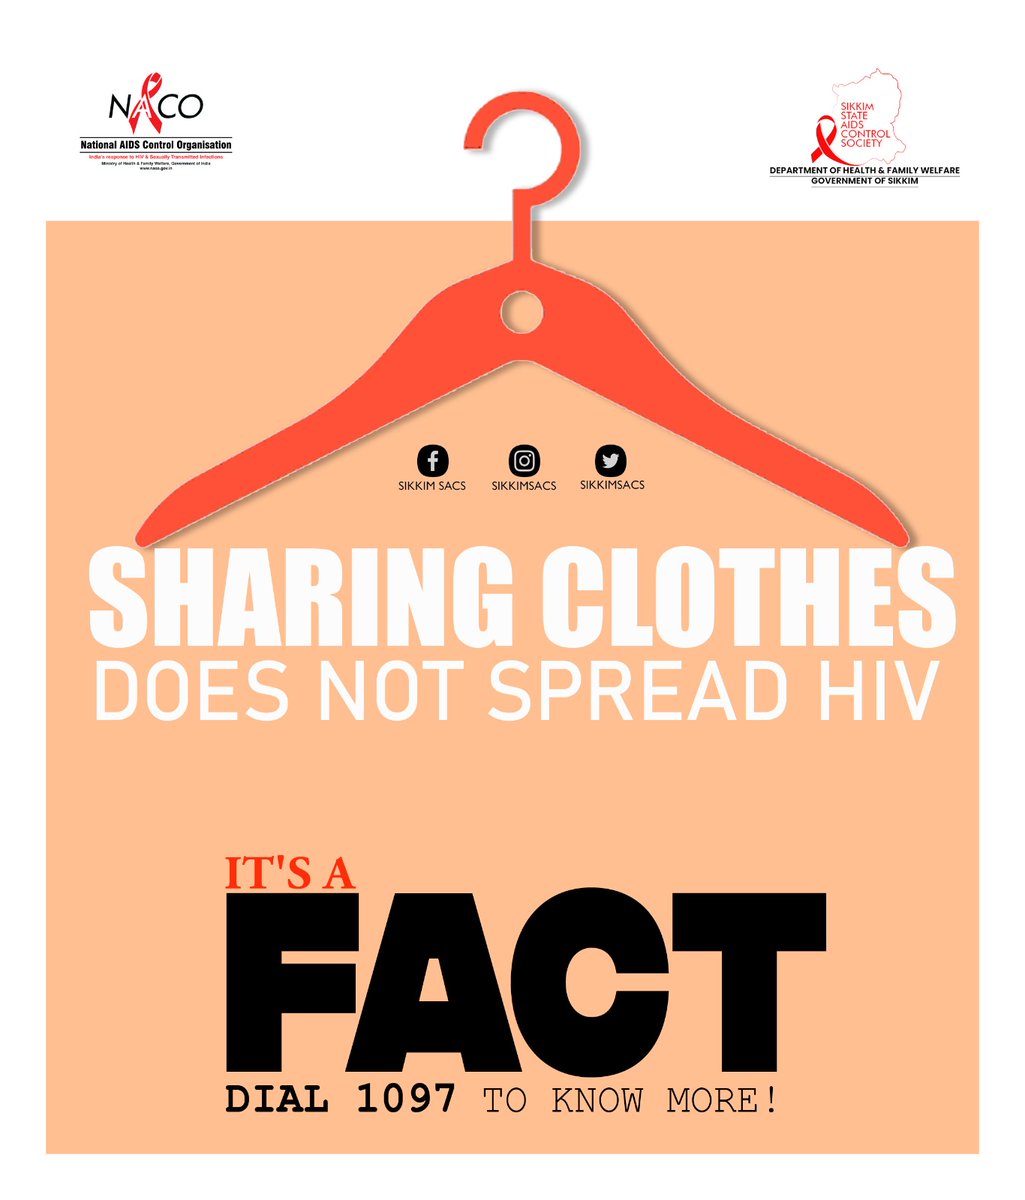 HIV is not transmitted by sharing clothes. IT IS A FACT. The virus does not live outside the body, so there is zero risk of HIV transmission through social contact.
GET INFORMED, DISPEL MYTH.
#jointheredrevolution #spreadaword #knowhivfacts #dial1097 #getinformedgettested